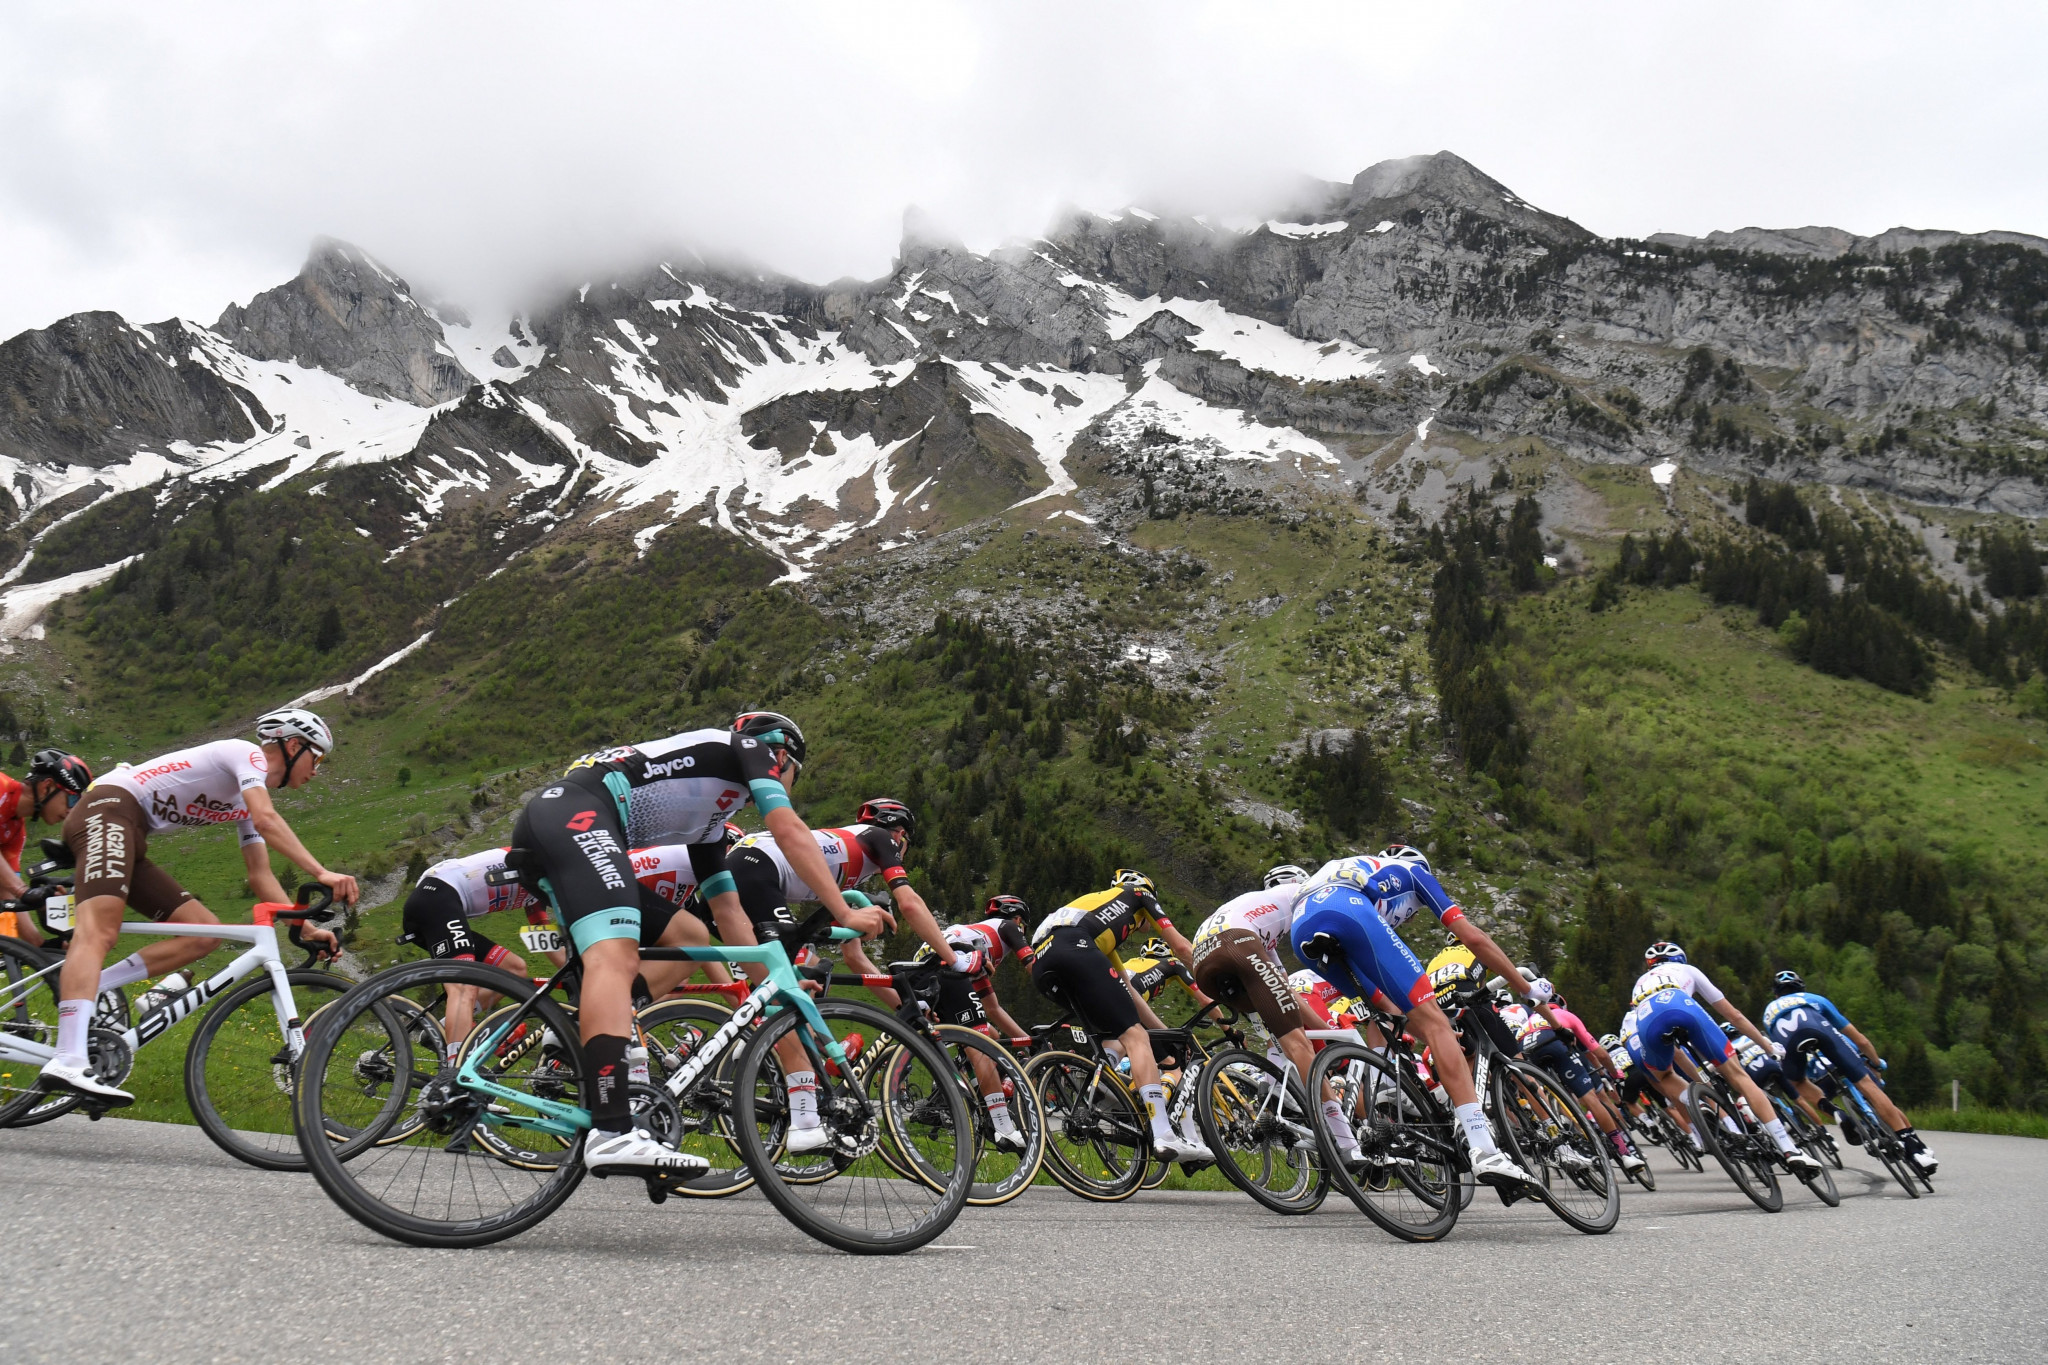 Haute-Savoie has been confirmed as the 2027 Cycling World Championships host ©Getty Images